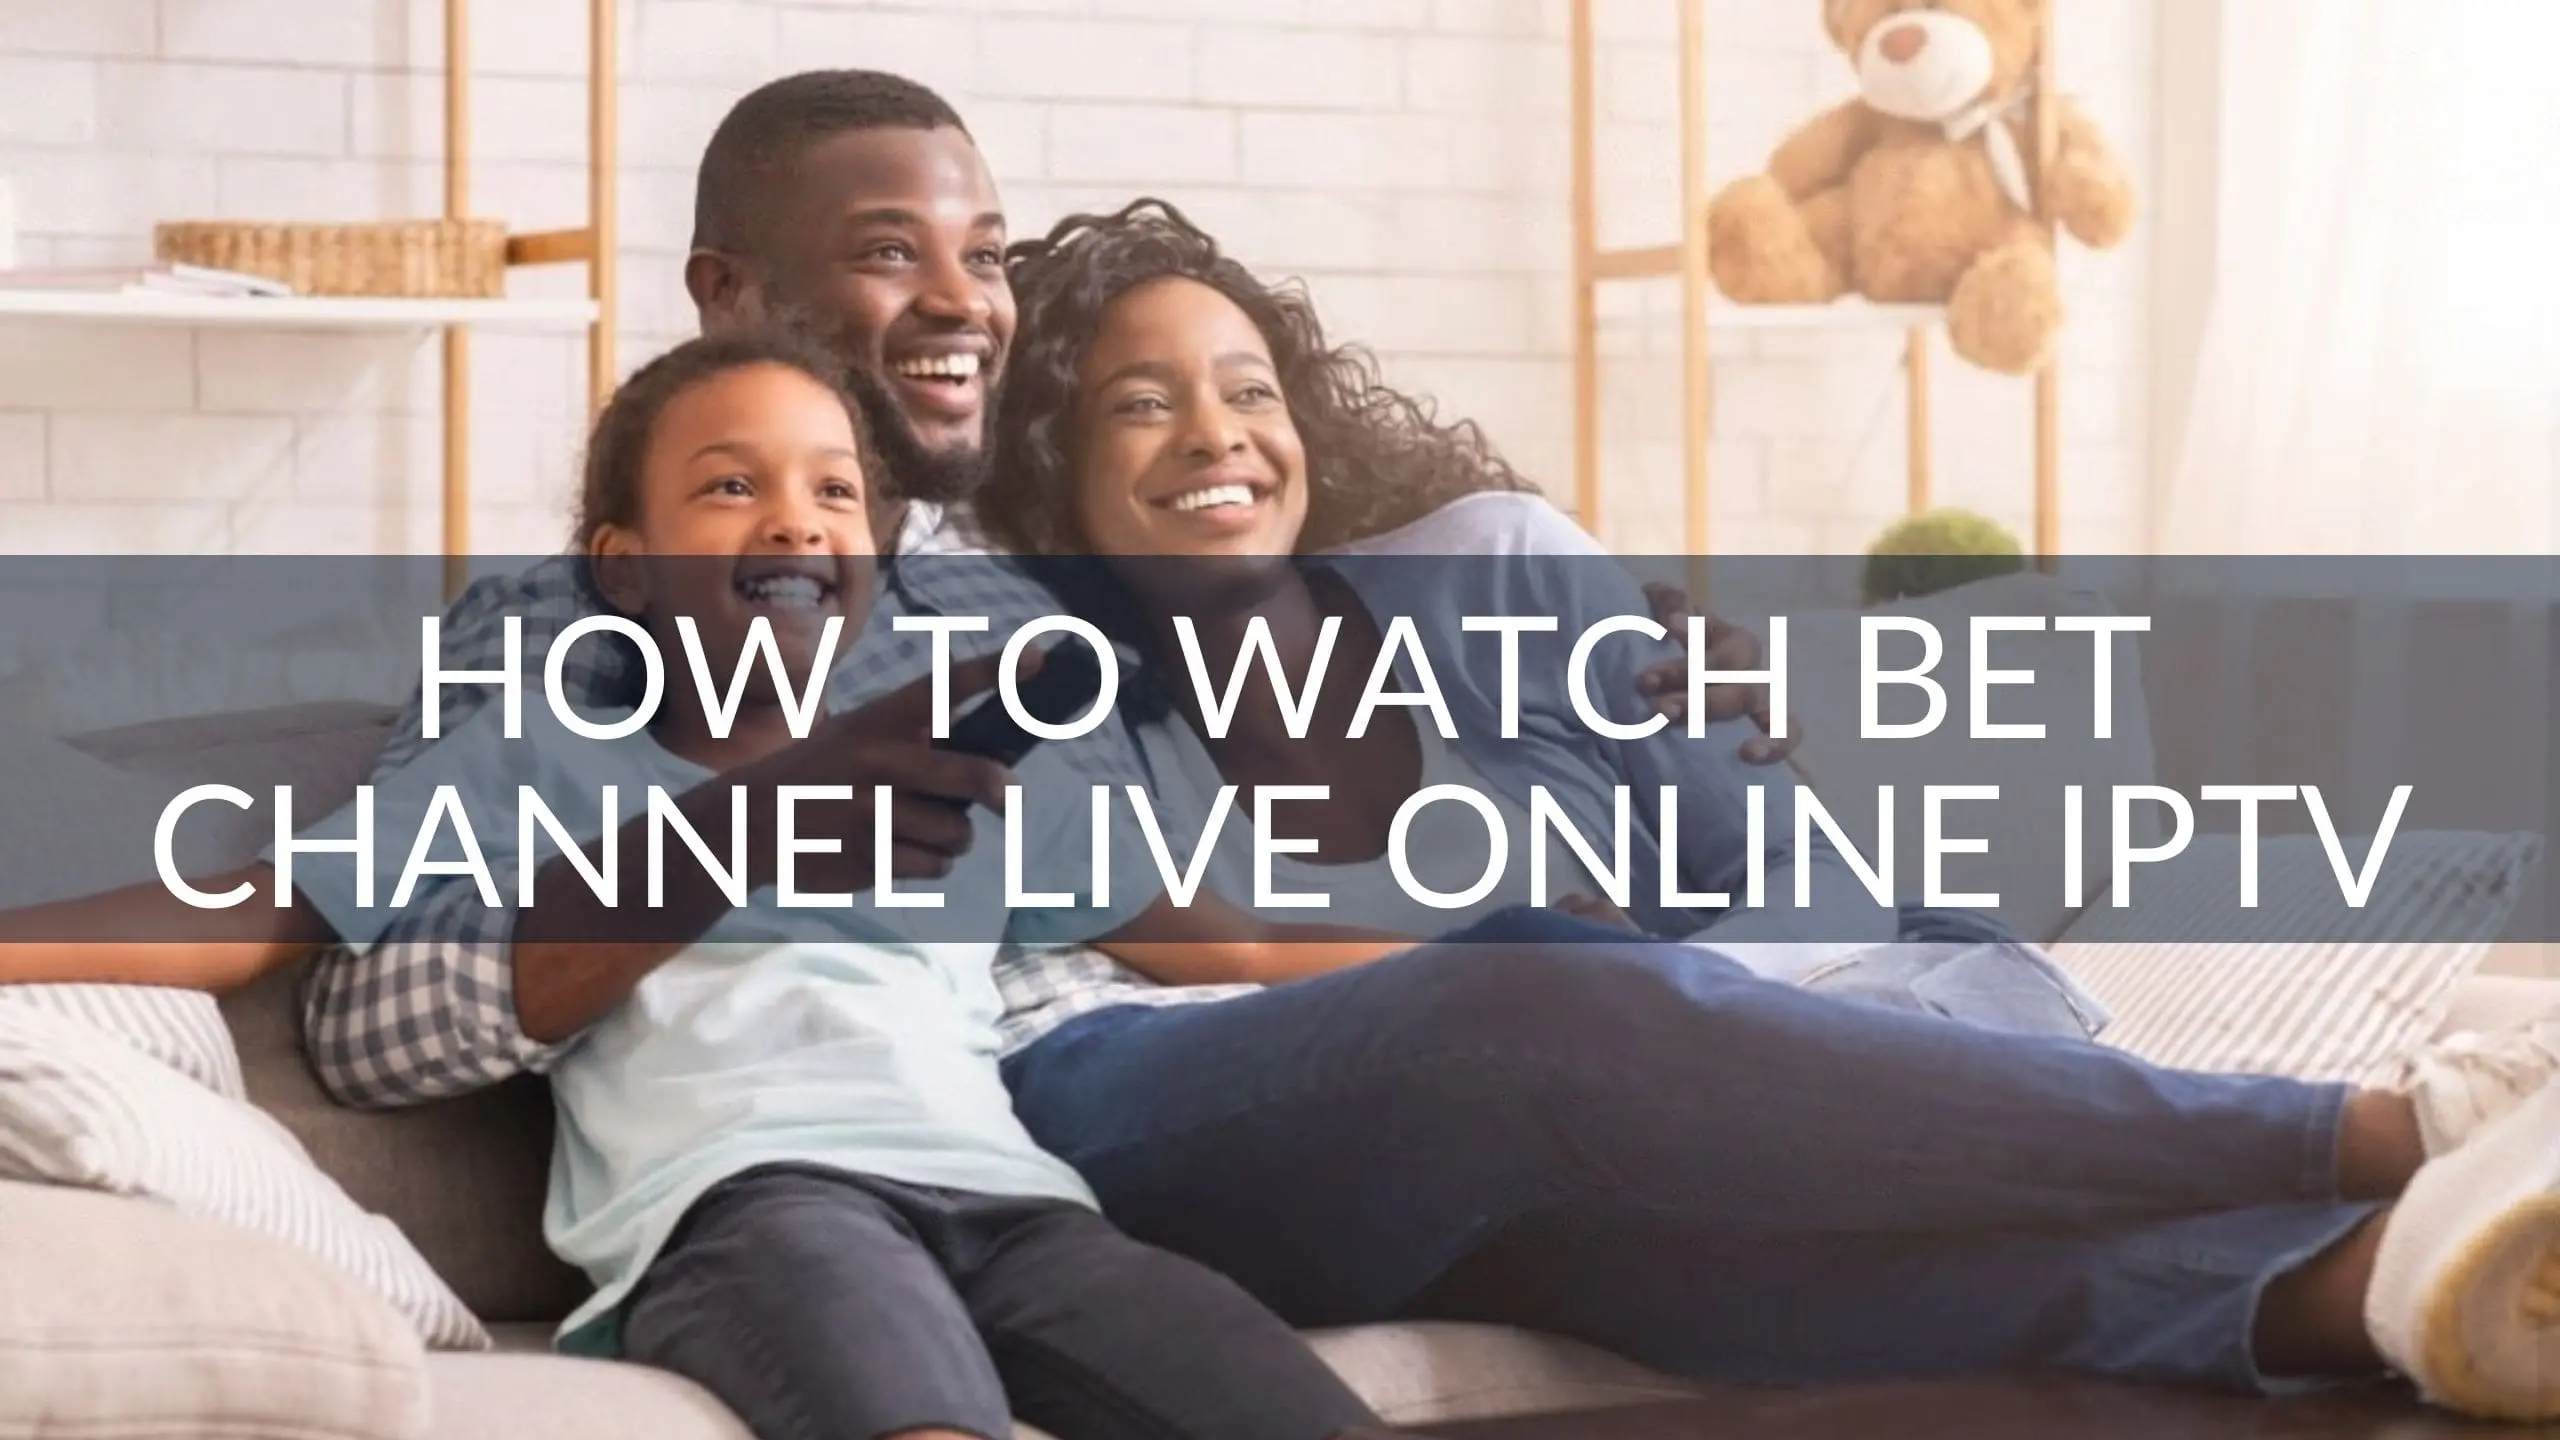 How to Watch BET Channel Live Online with IPTV